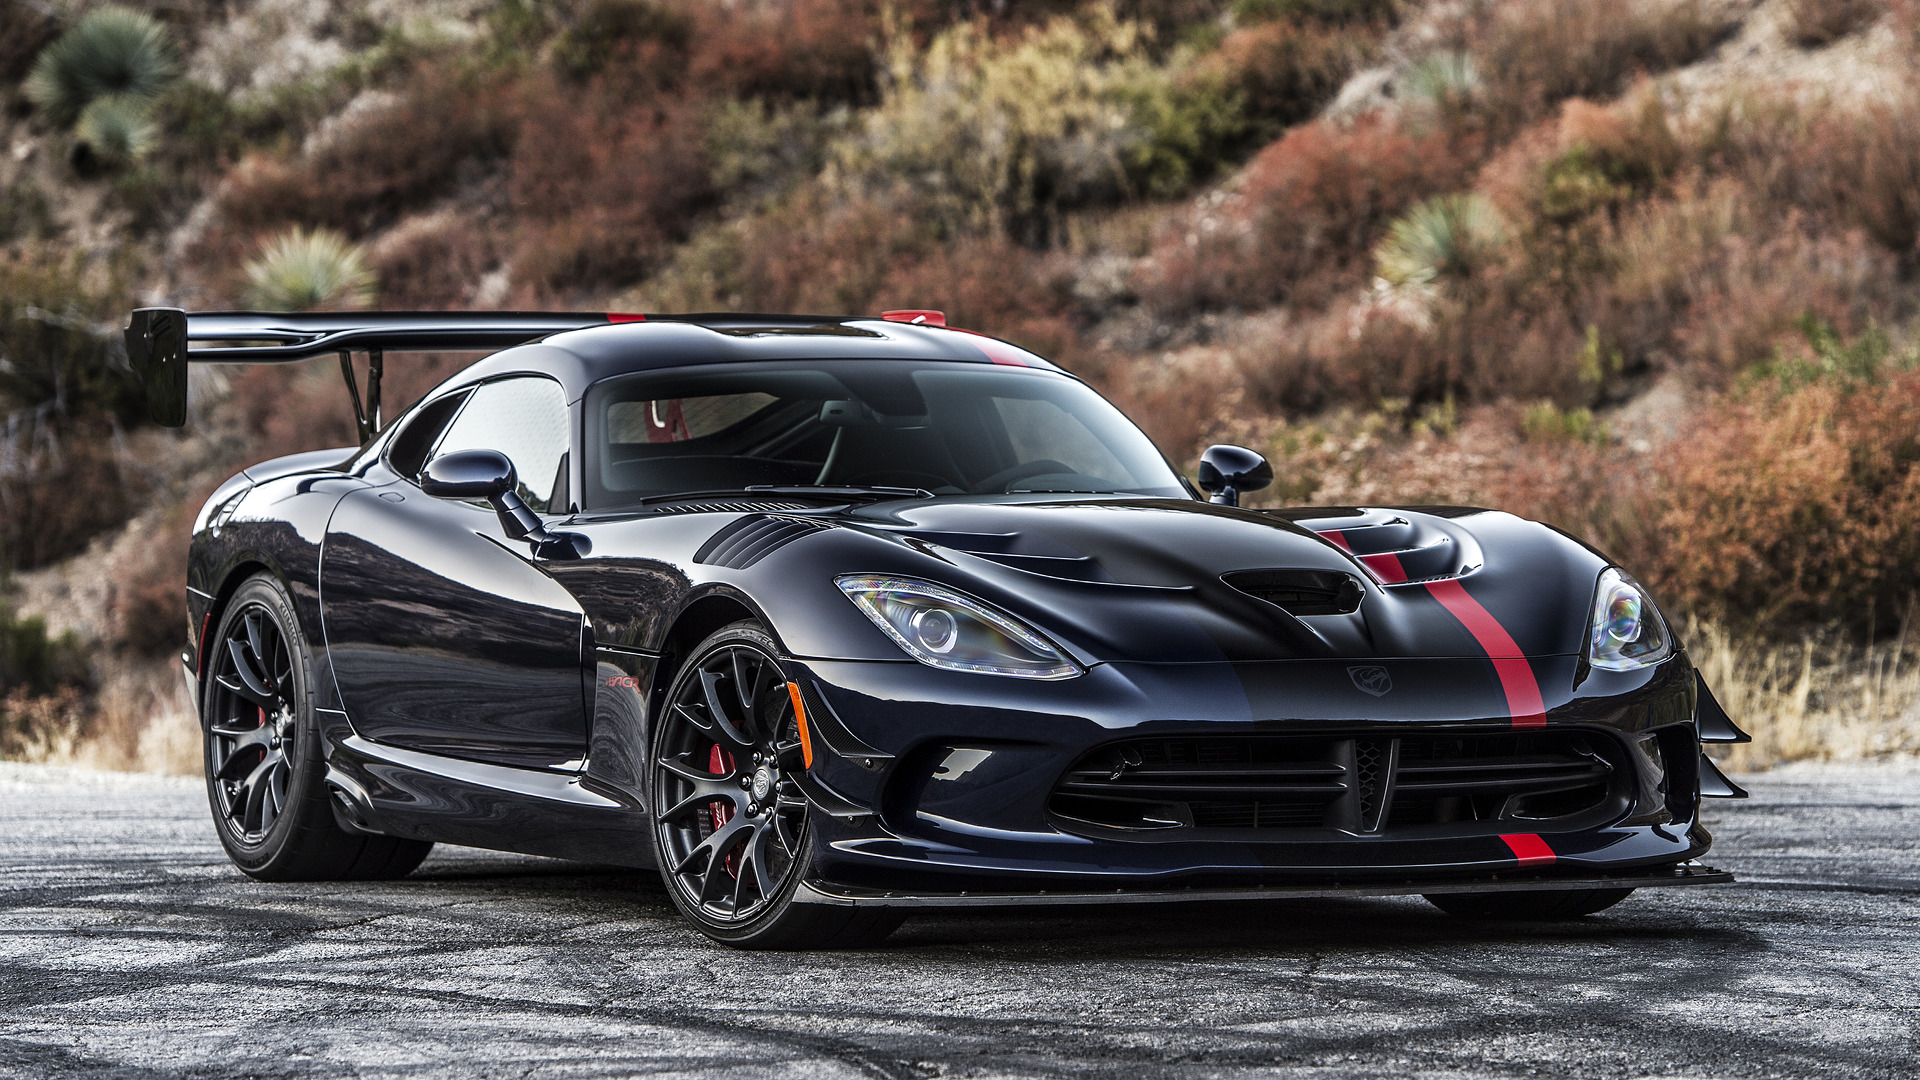 Dodge Sold Two New Vipers In Q3 2020, Production Ended In 2017